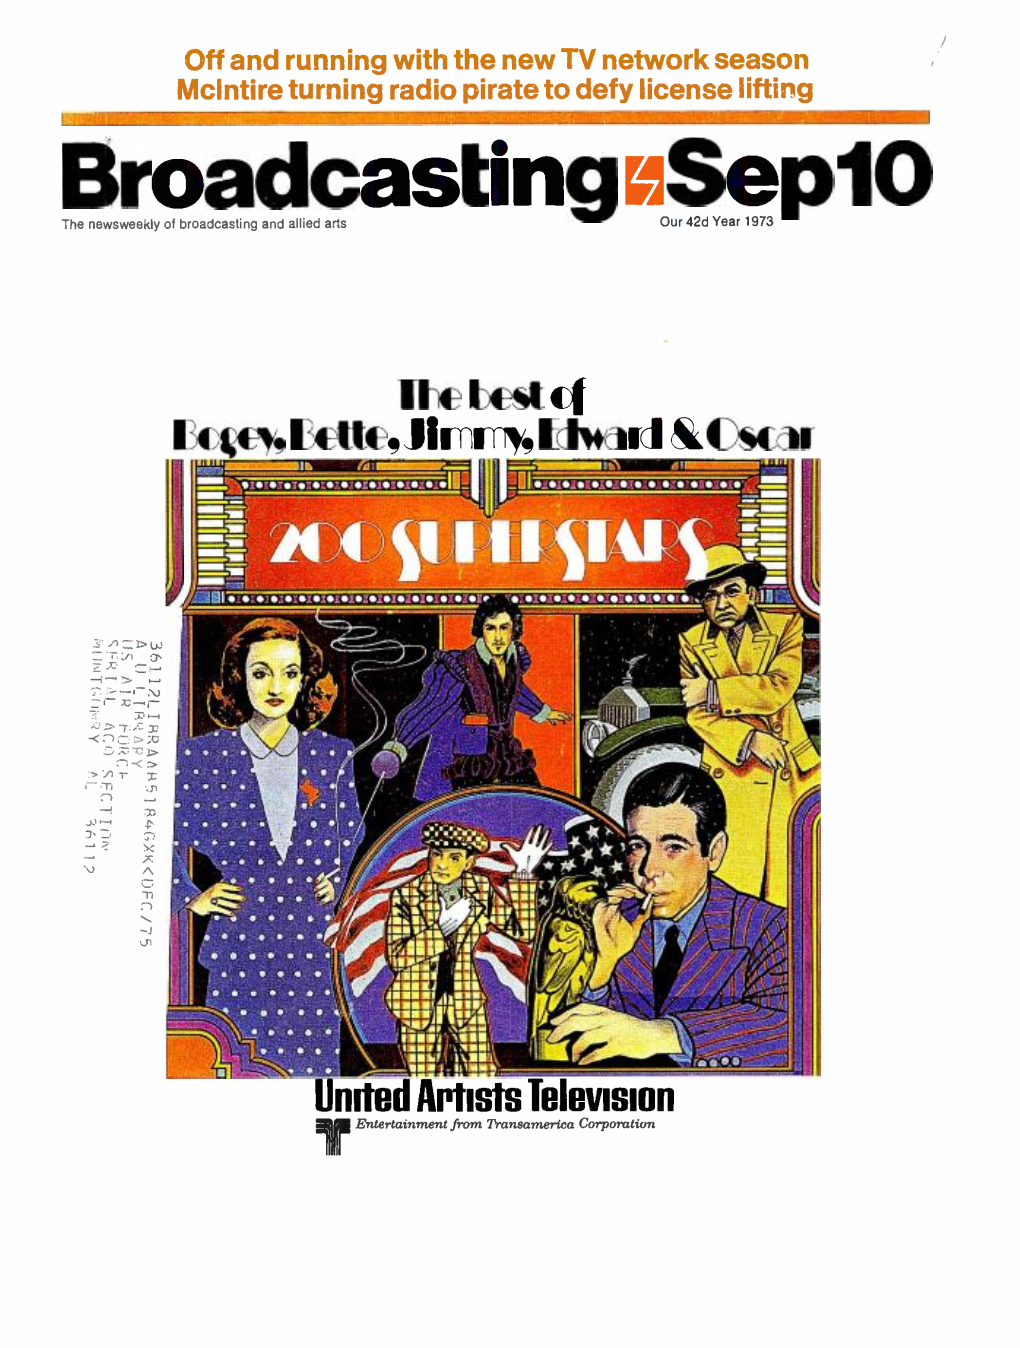 Broadcasting Iiseplo the Newsweekly of Broadcasting and Allied Arts Our 42D Year 1973